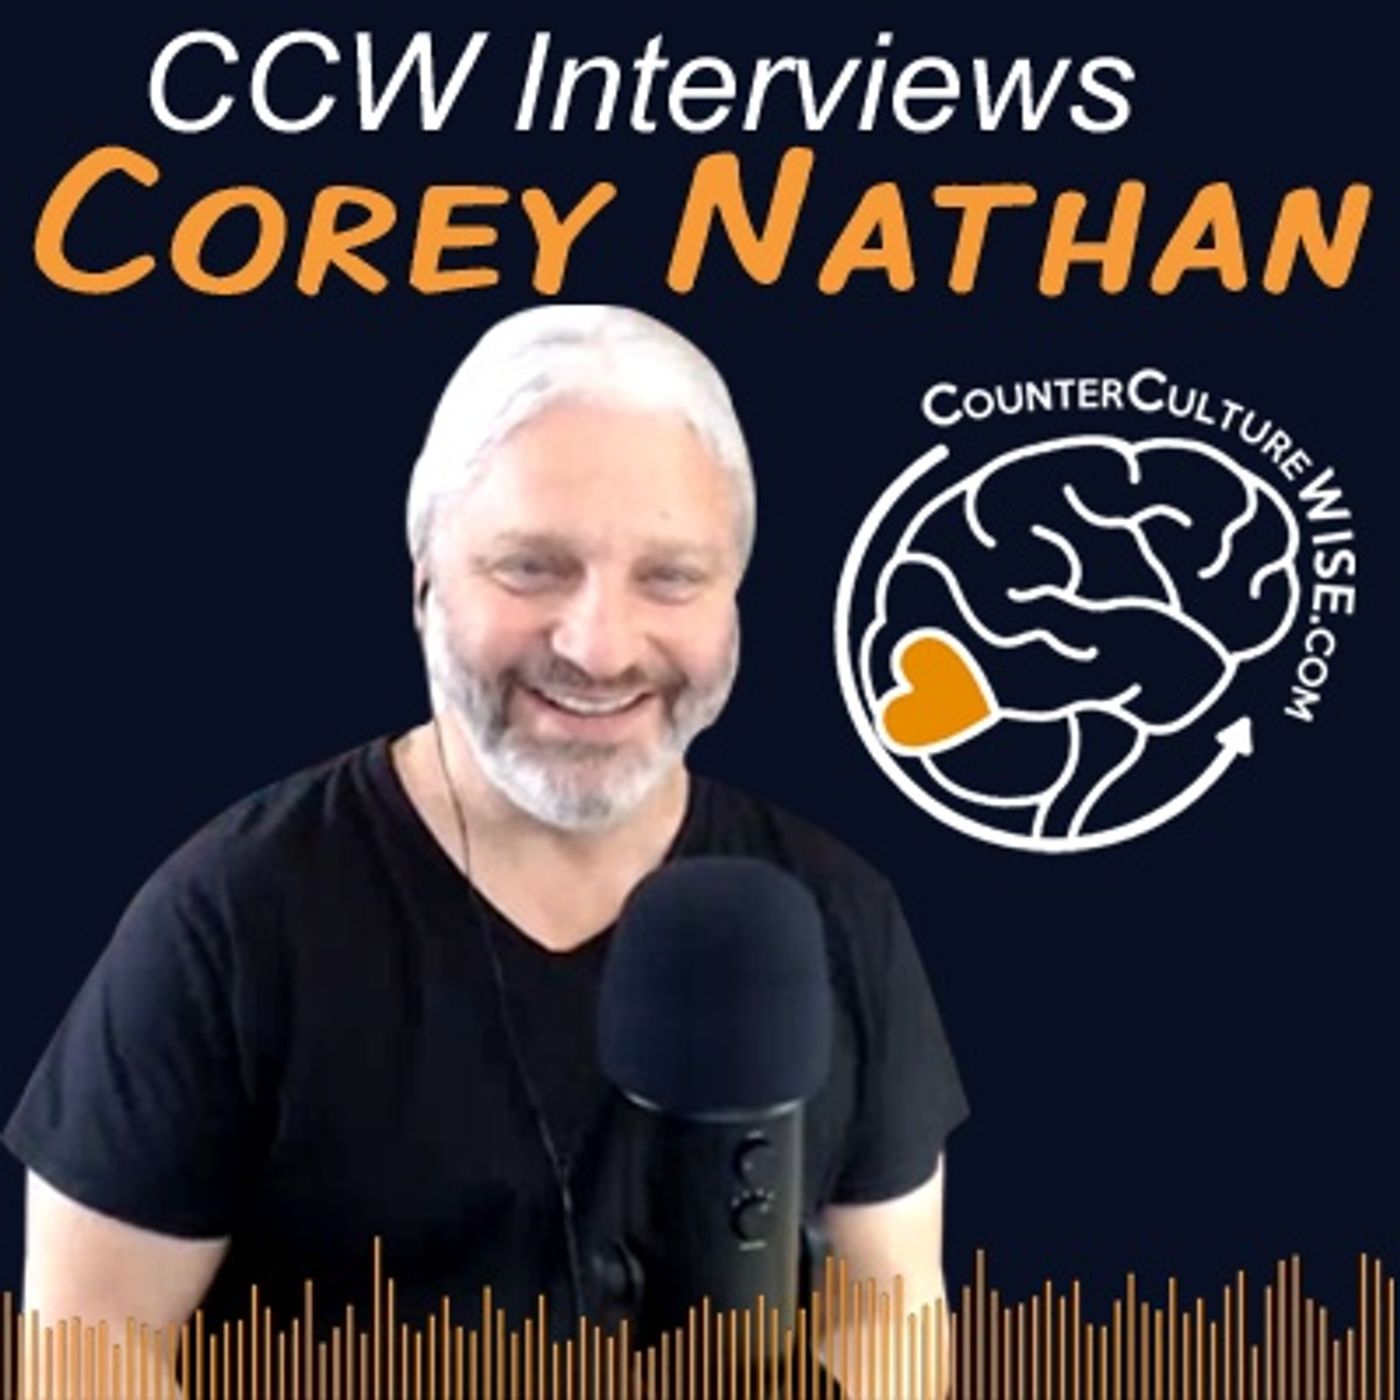 Interview with Corey Nathan